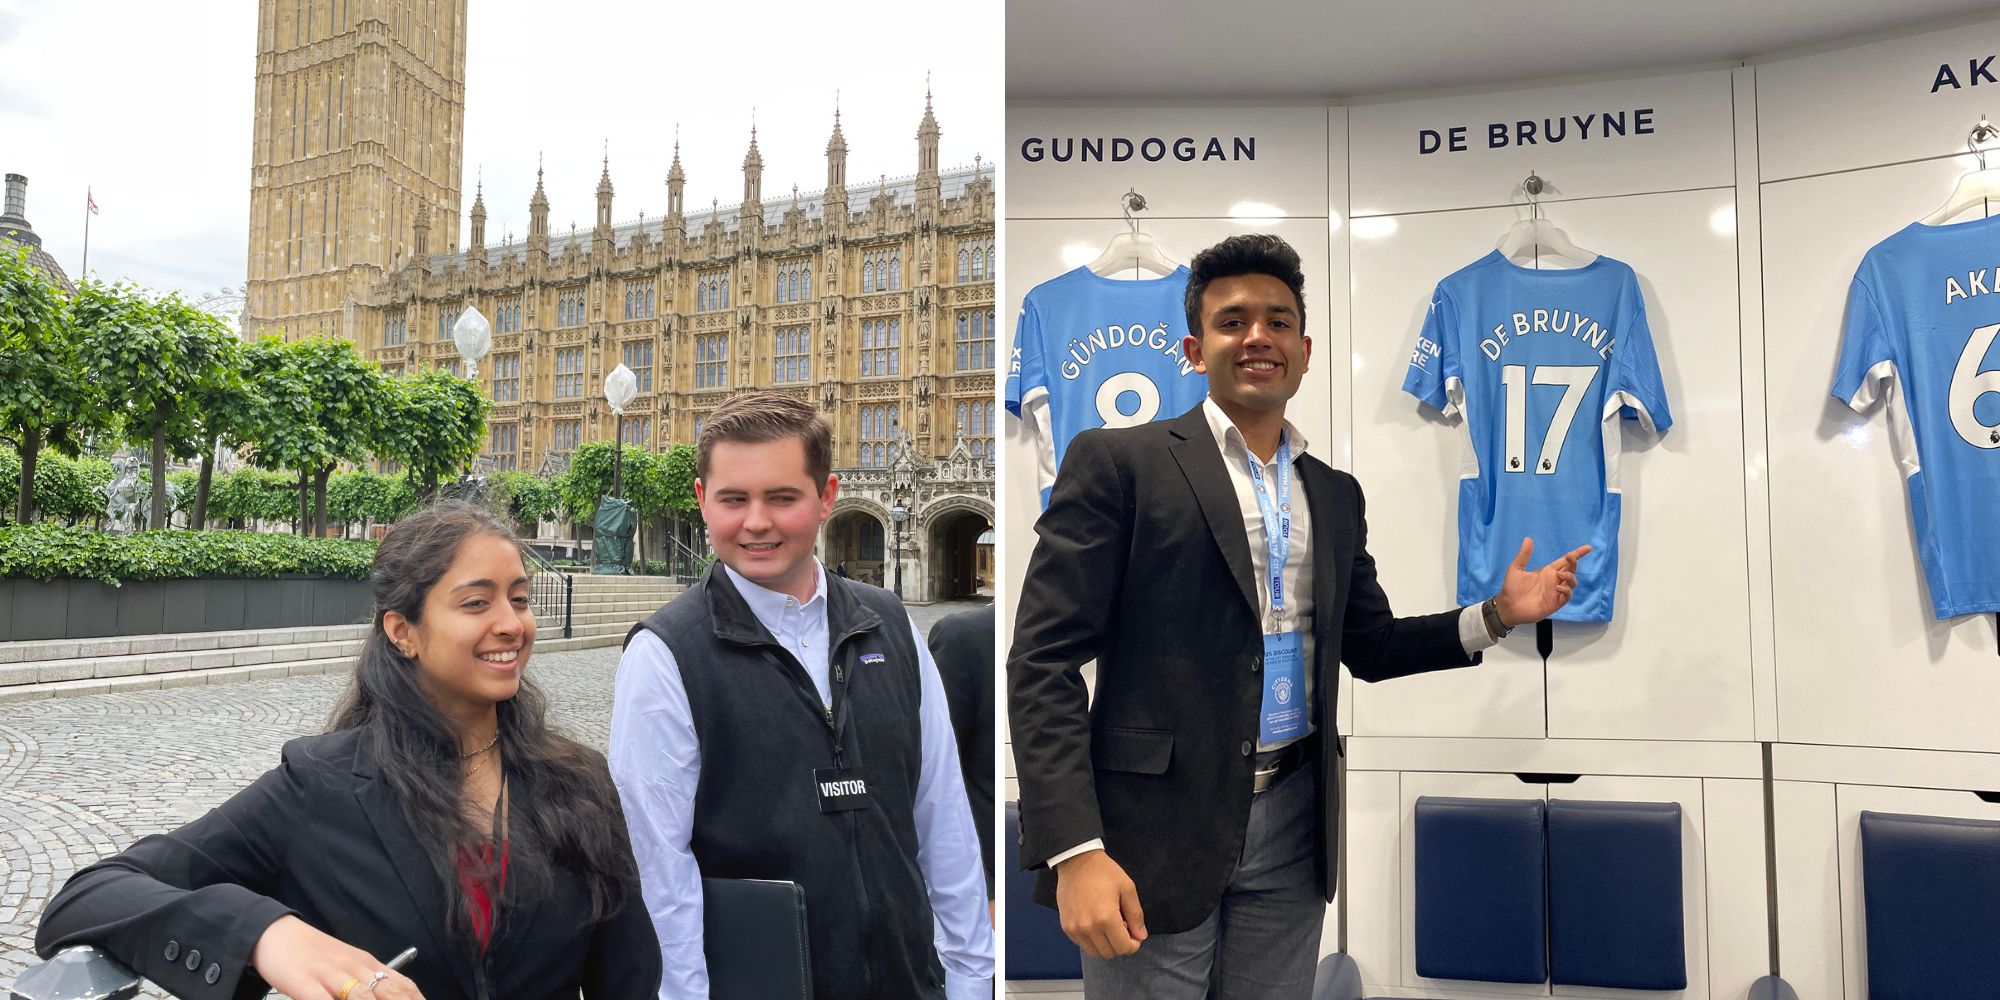 Left, Shivani Desai and another student in front of Parliament and Big Ben in England. Right: Shivam Shah in the locker room in front of jerseys for Manchester City Football Club.